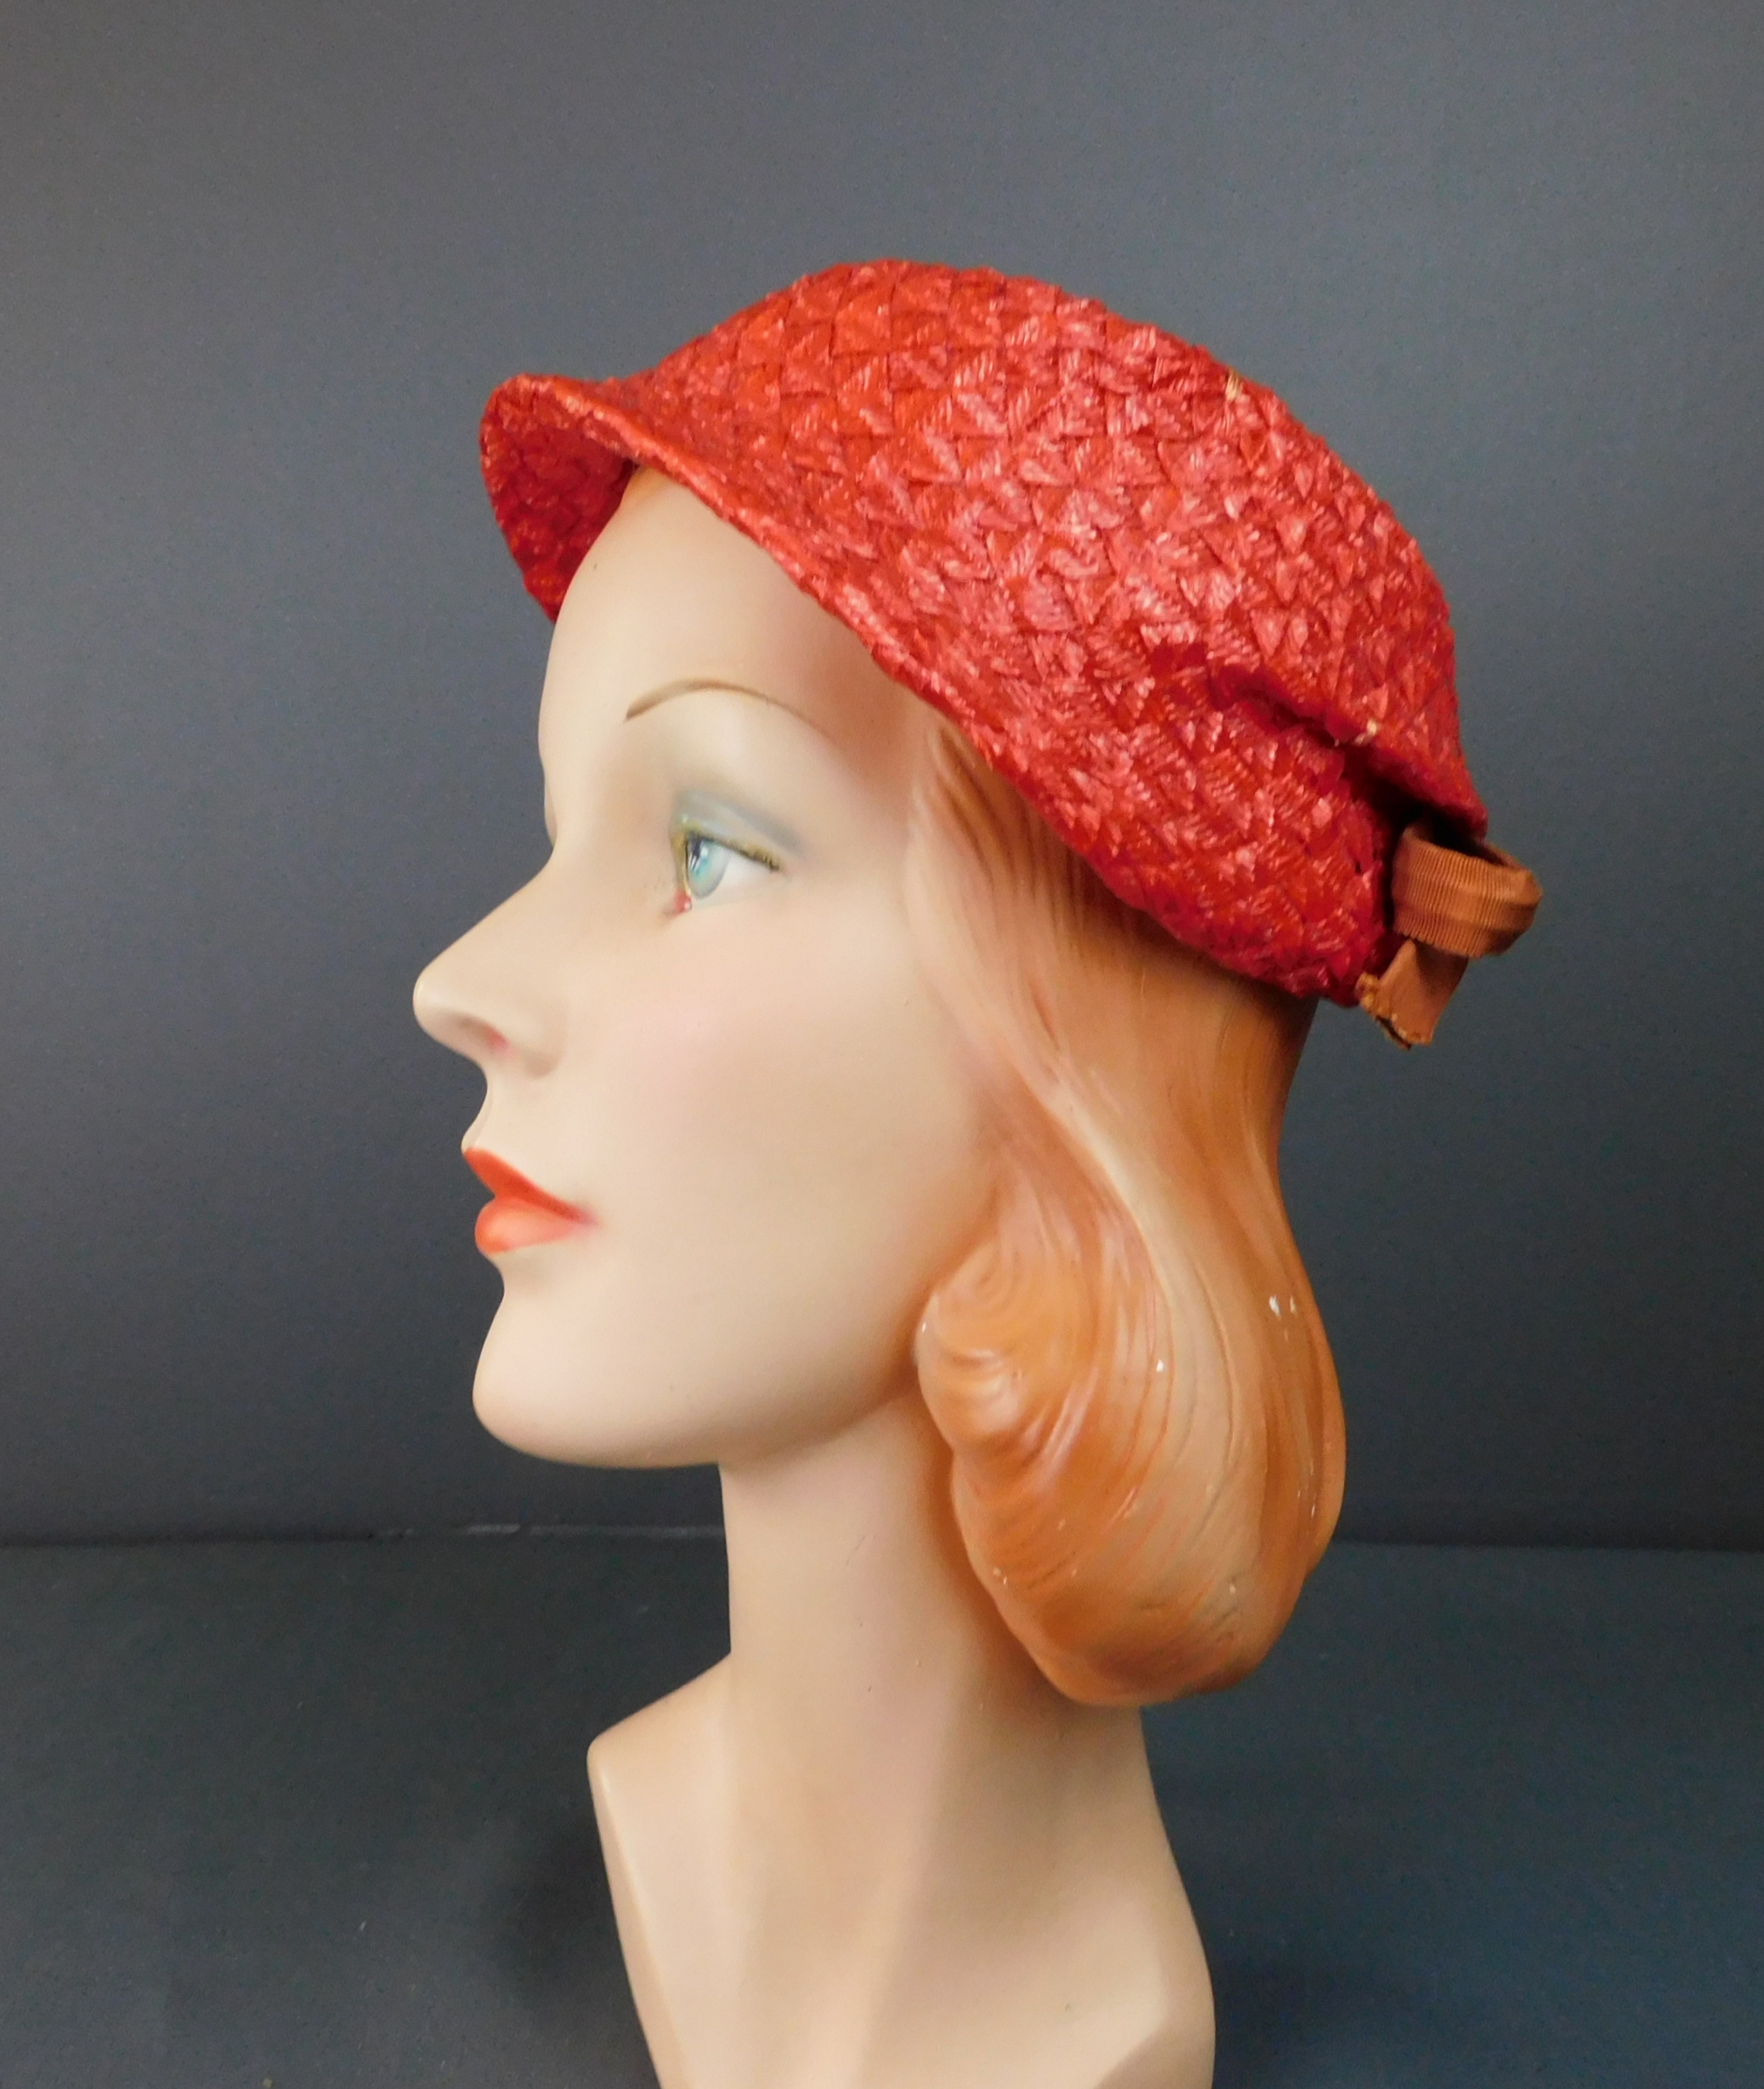 Vintage Red Straw Hat with Ribbon in the back, late 1940s